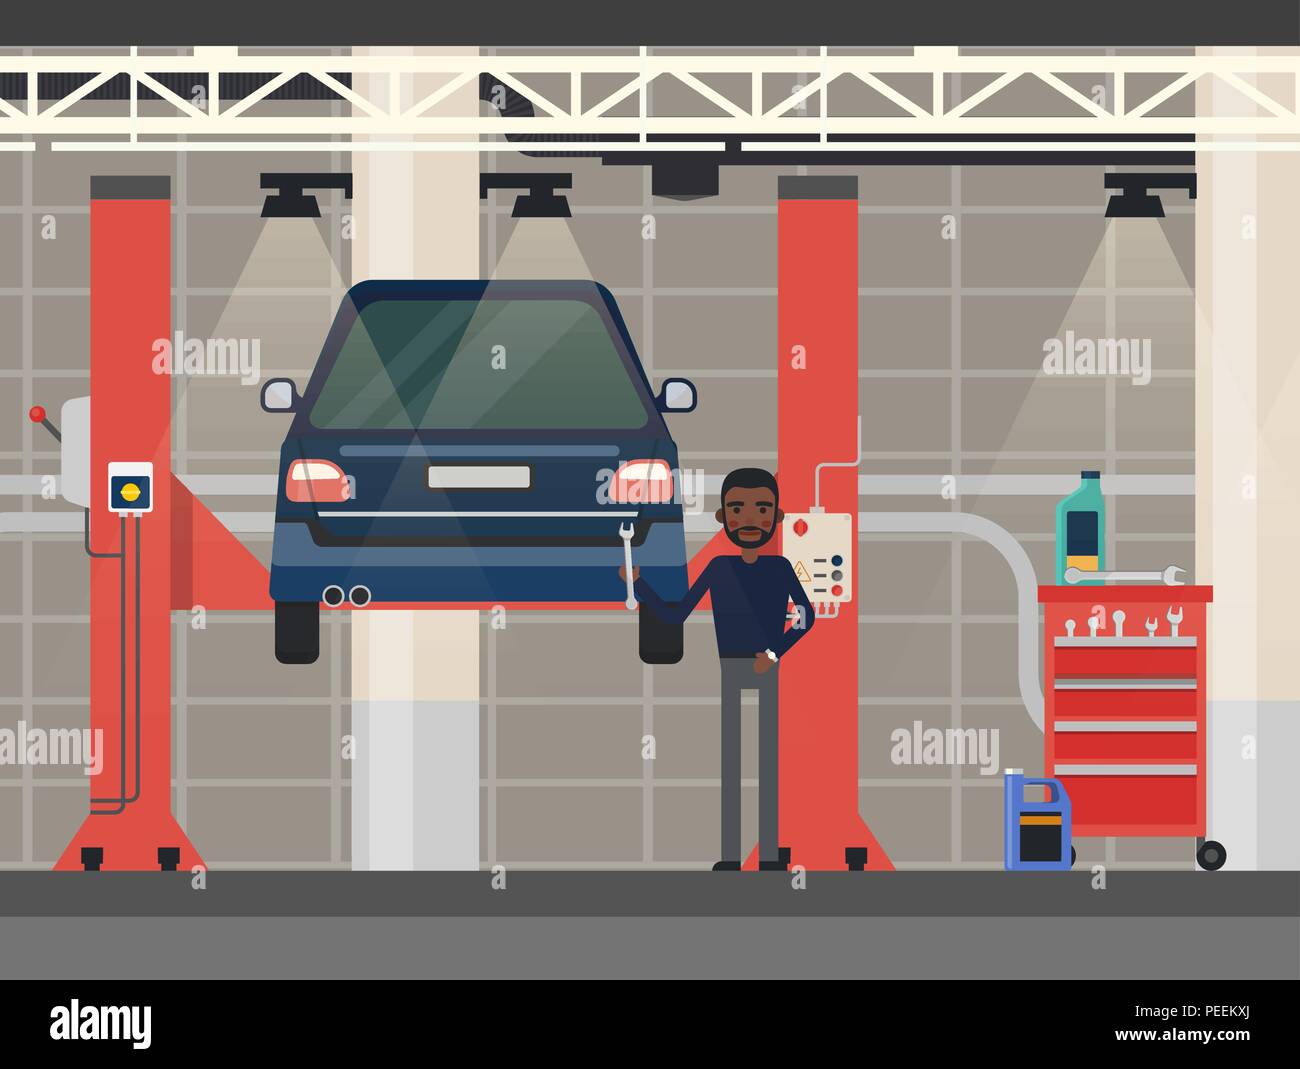 Repairman near automobile at hydraulic lift. Car diagnostic or maintenance, inspection or check, tuning or repair at garage. Technician or worker, man near vehicle hoist or elevator. Automotive theme Stock Vector